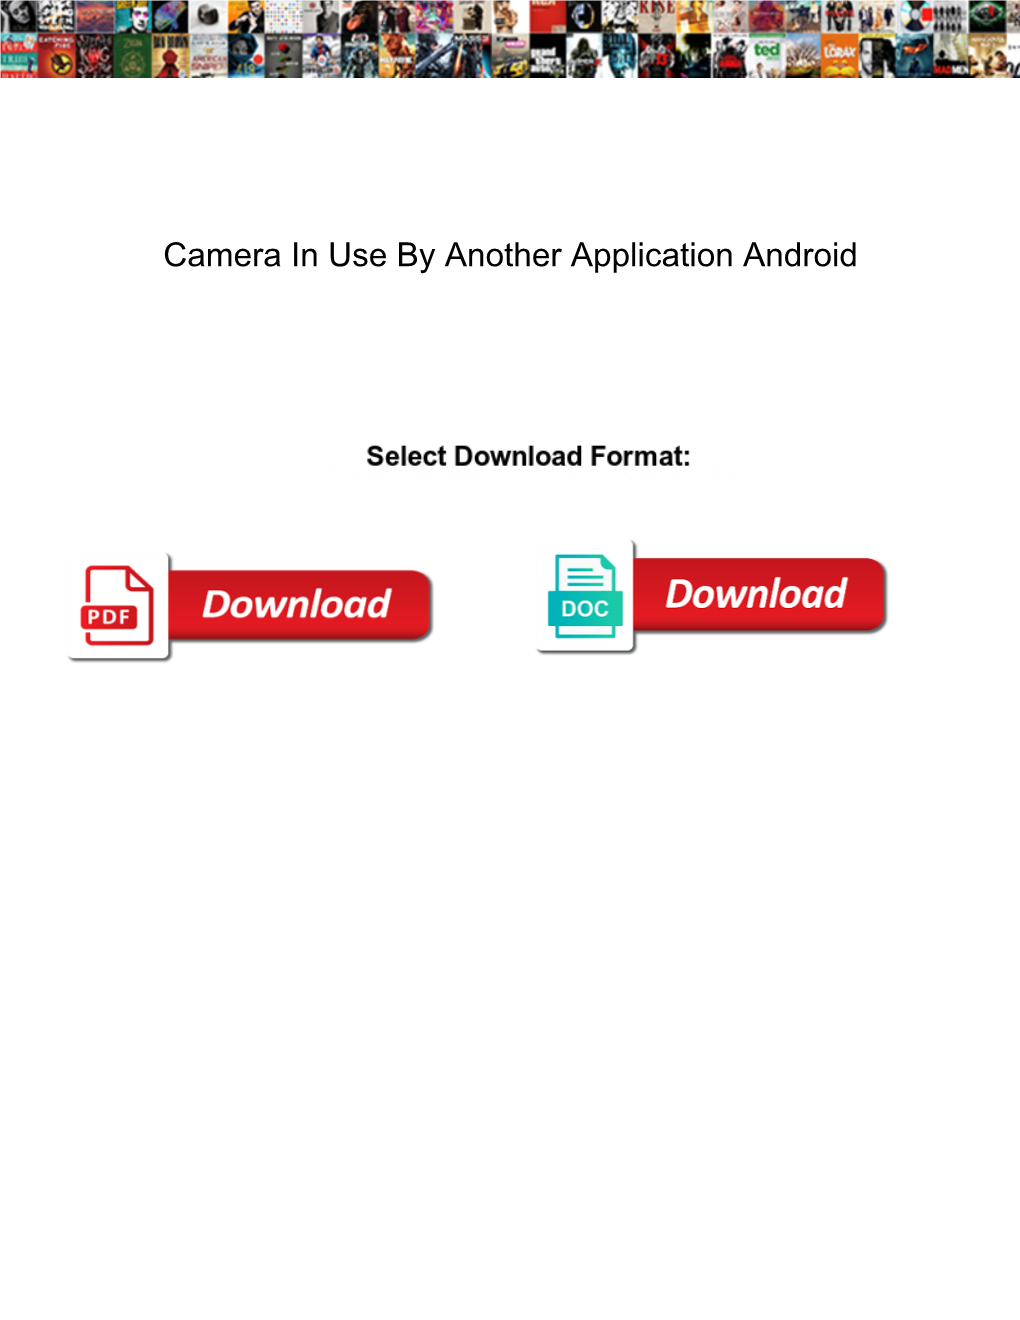 Camera in Use by Another Application Android